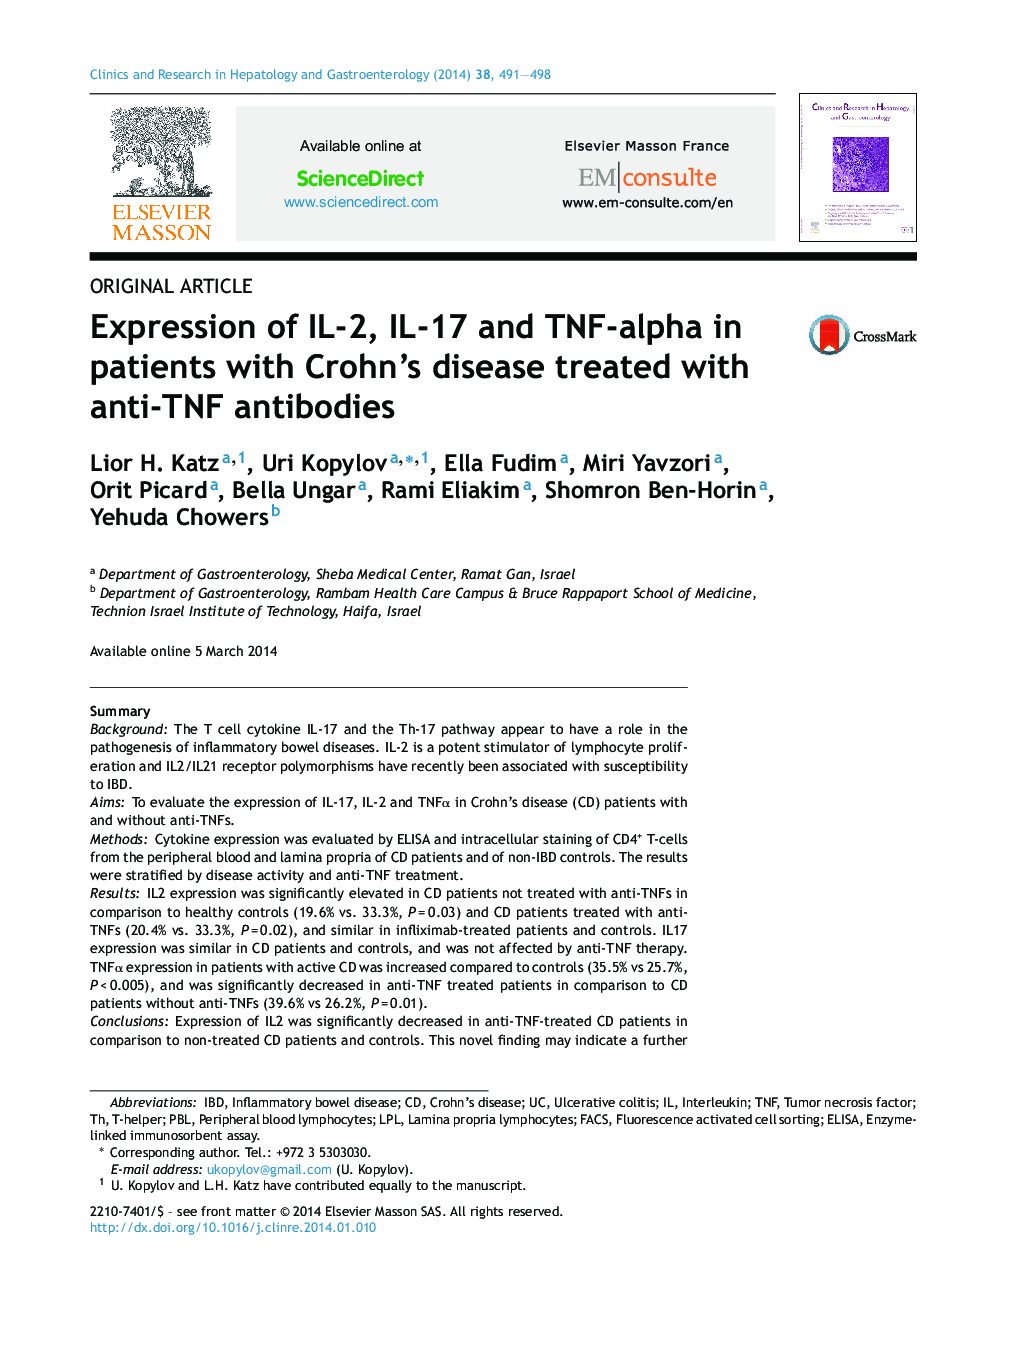 Expression of IL-2, IL-17 and TNF-alpha in patients with Crohn's disease treated with anti-TNF antibodies